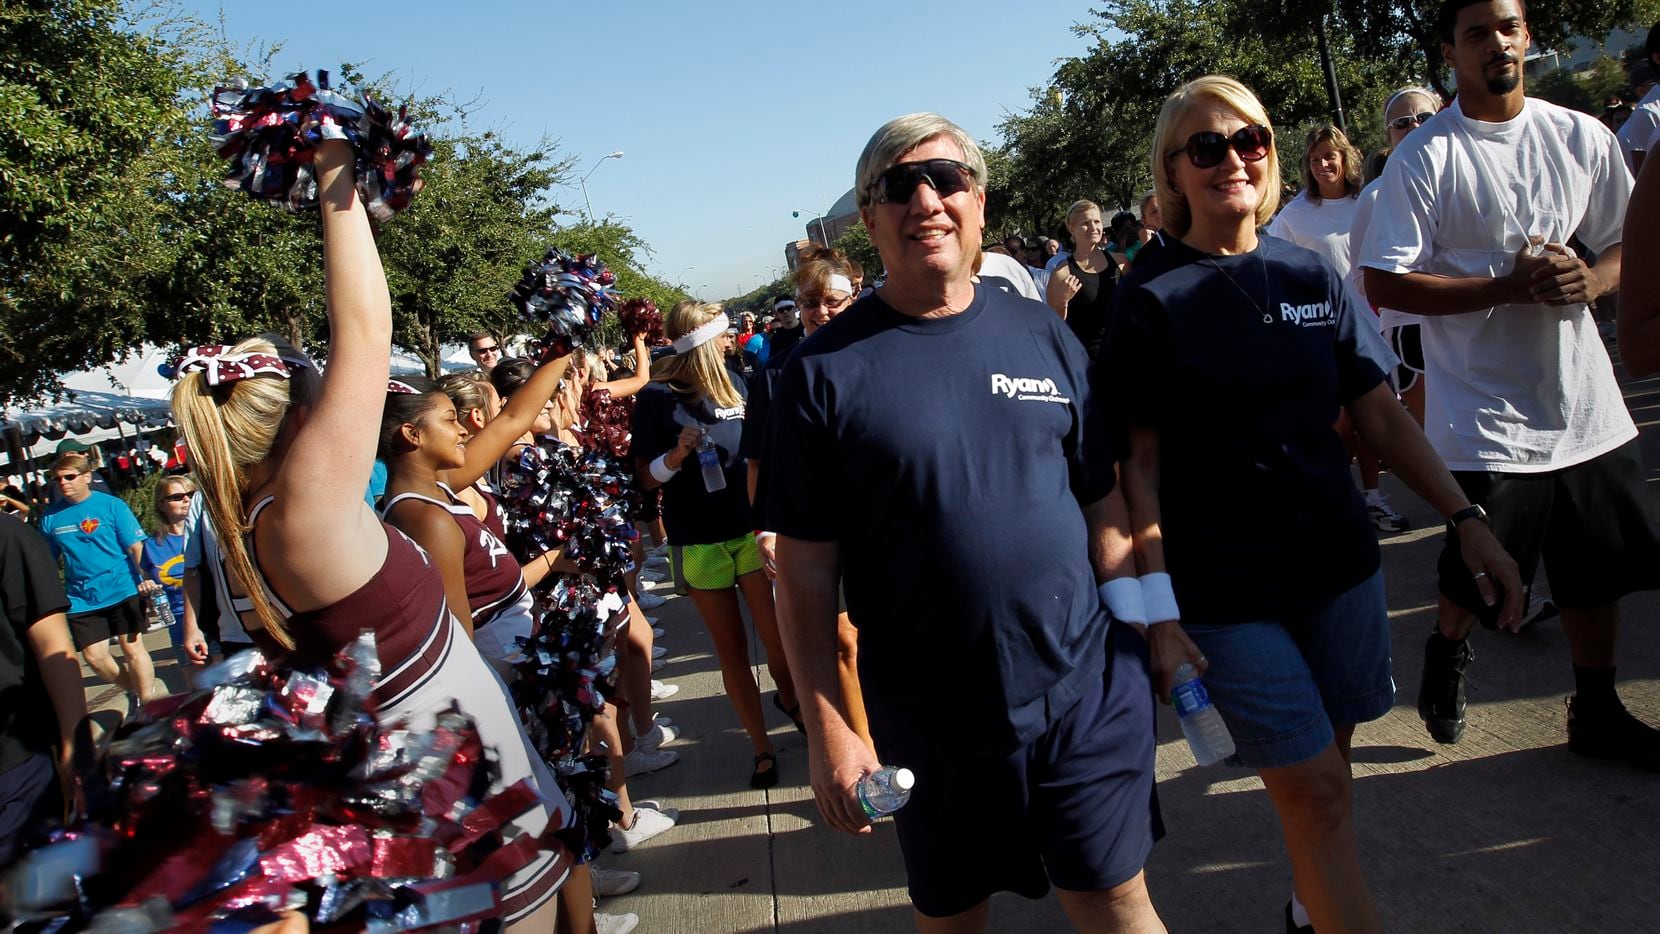 Heart Walk expects thousands for annual event in downtown Dallas